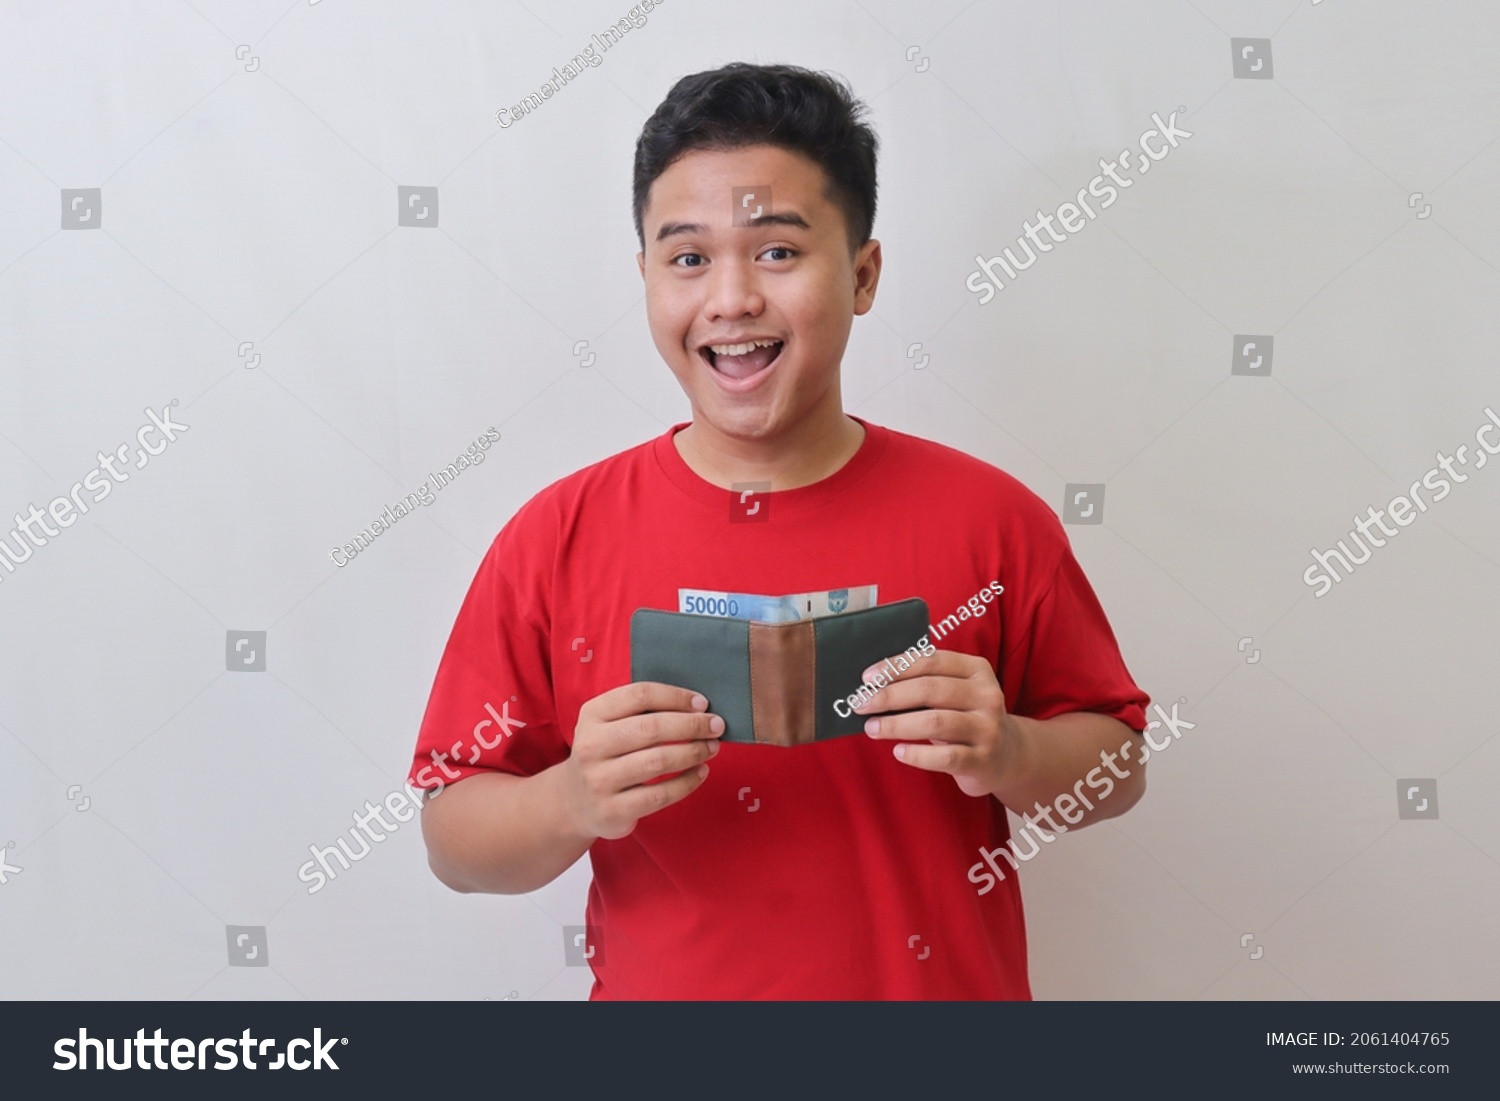 Portrait of attractive Asian man in red t-shirt looking at camera, holding a wallet with rupiah banknote. Isolated image on gray background #2061404765